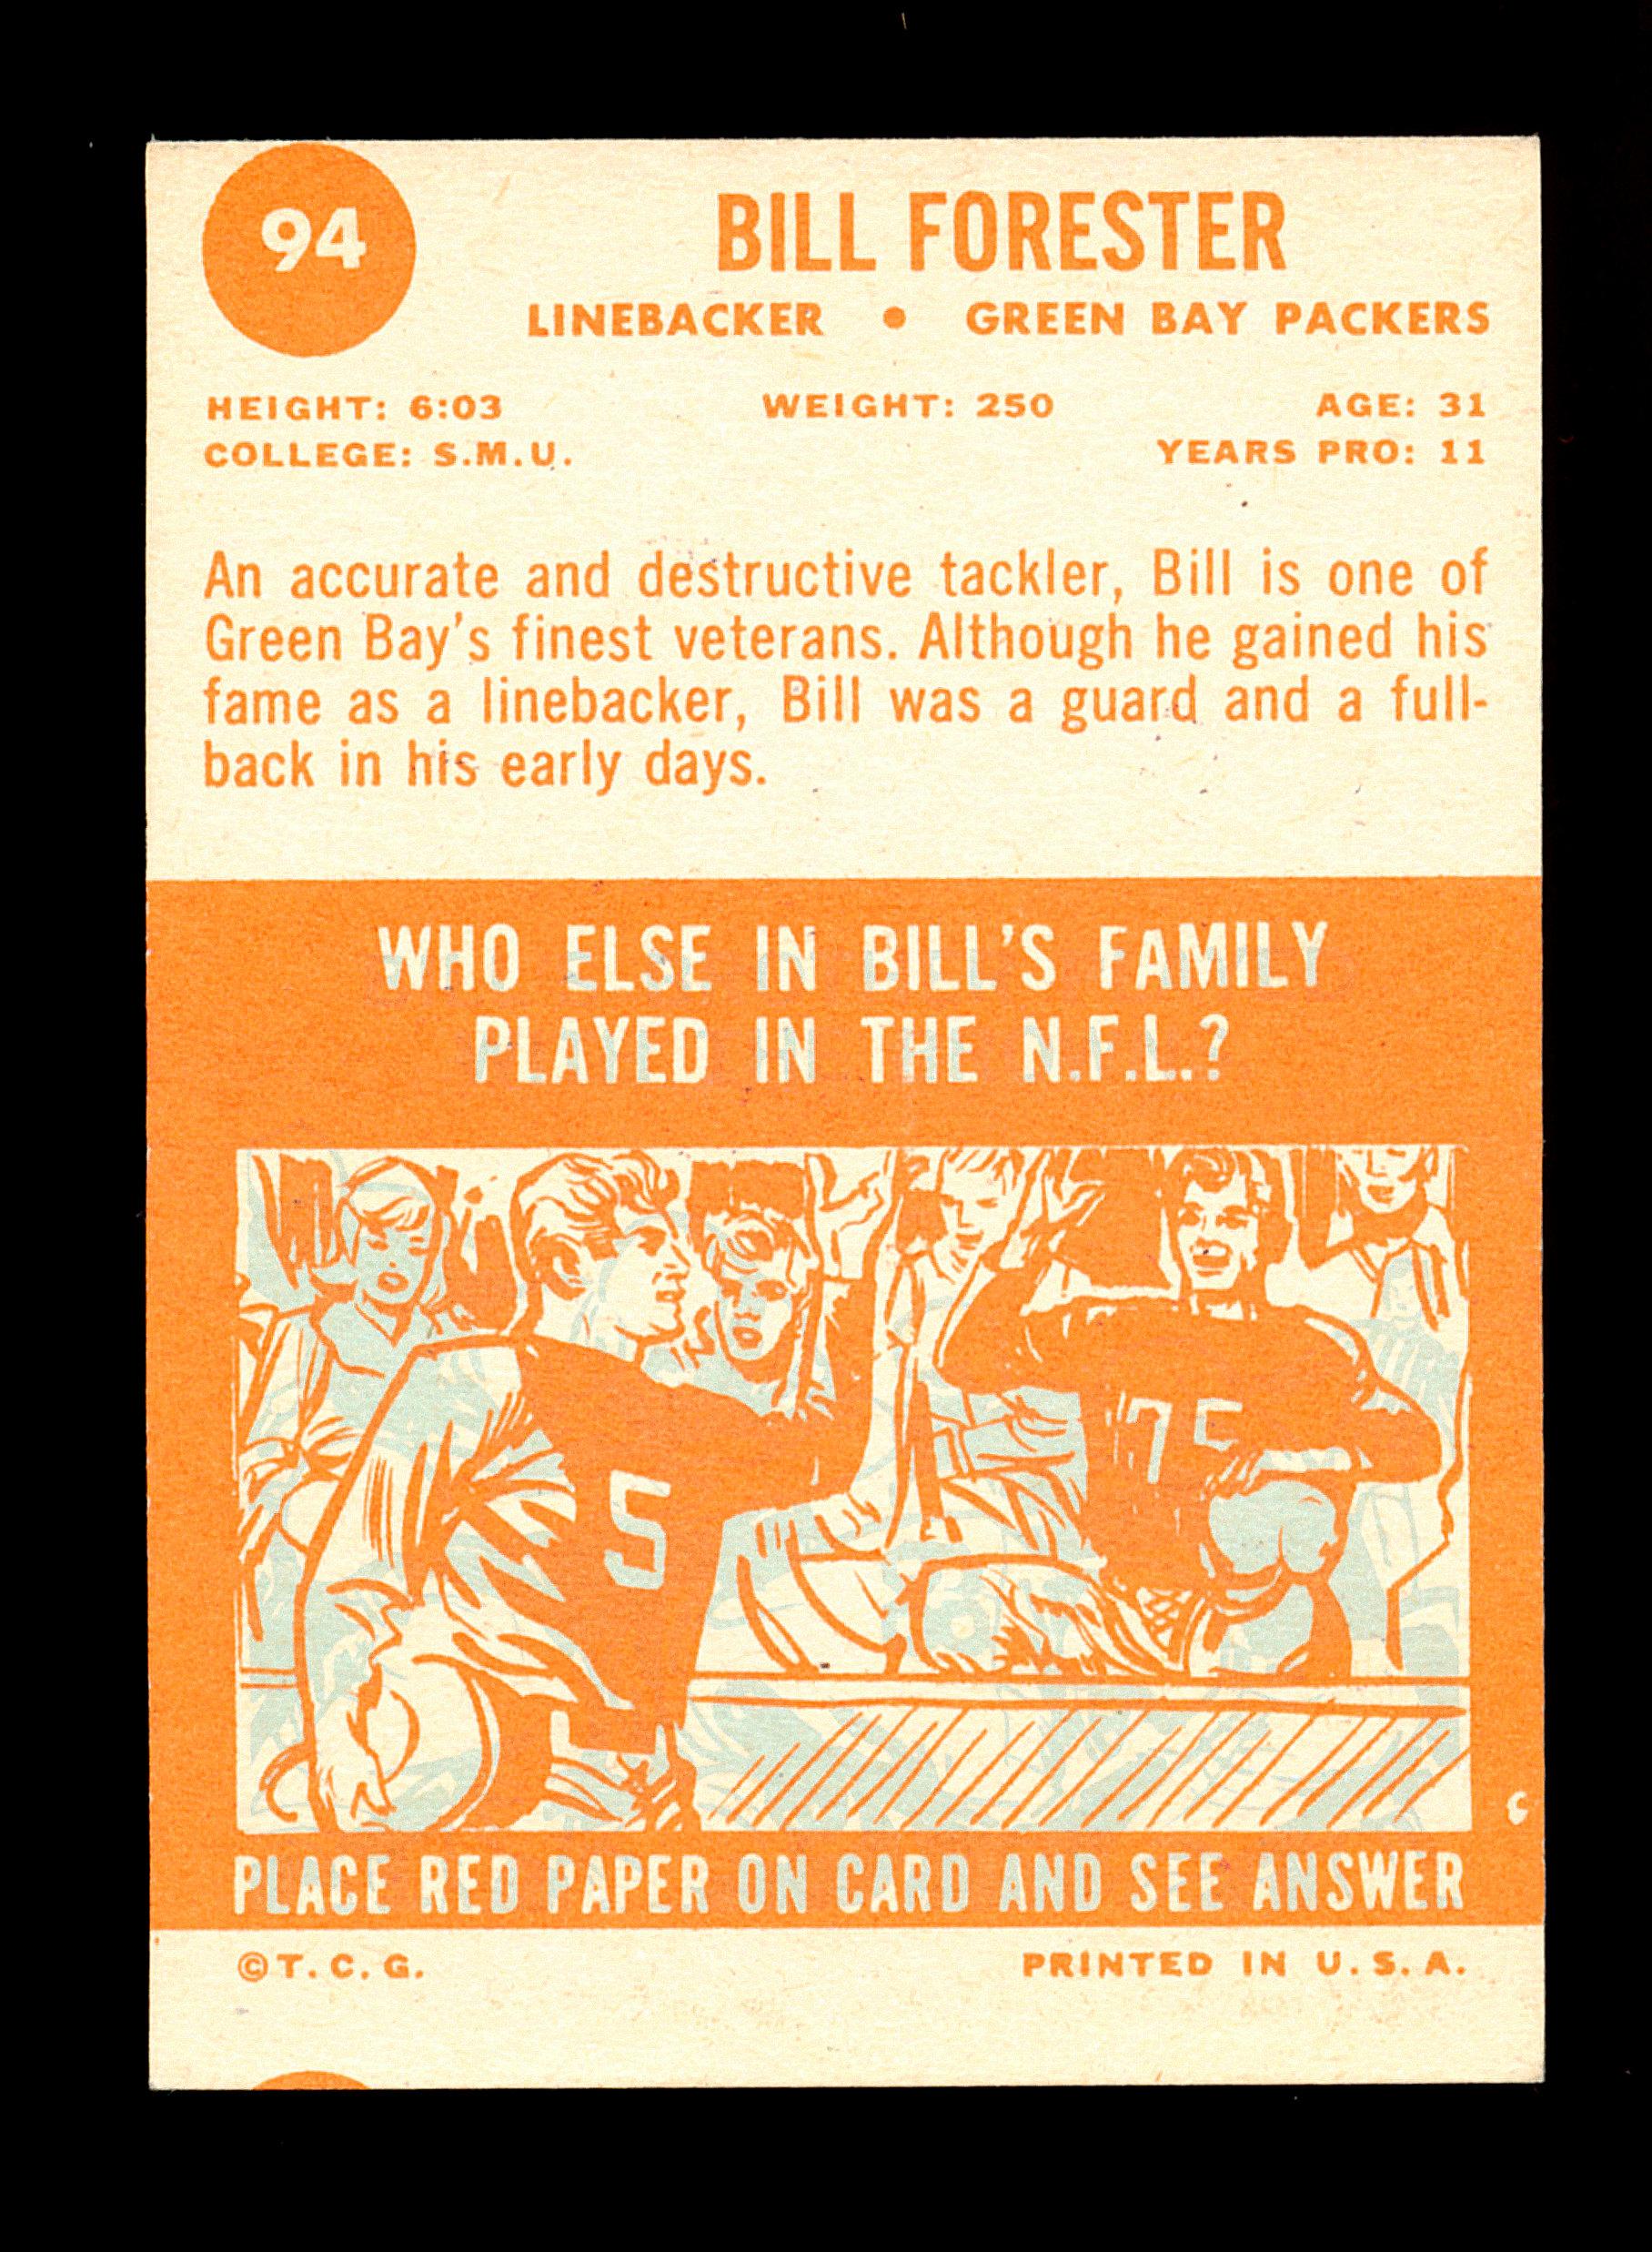 1963 Topps Football Card #94 Bill Forester Green Bay Packers